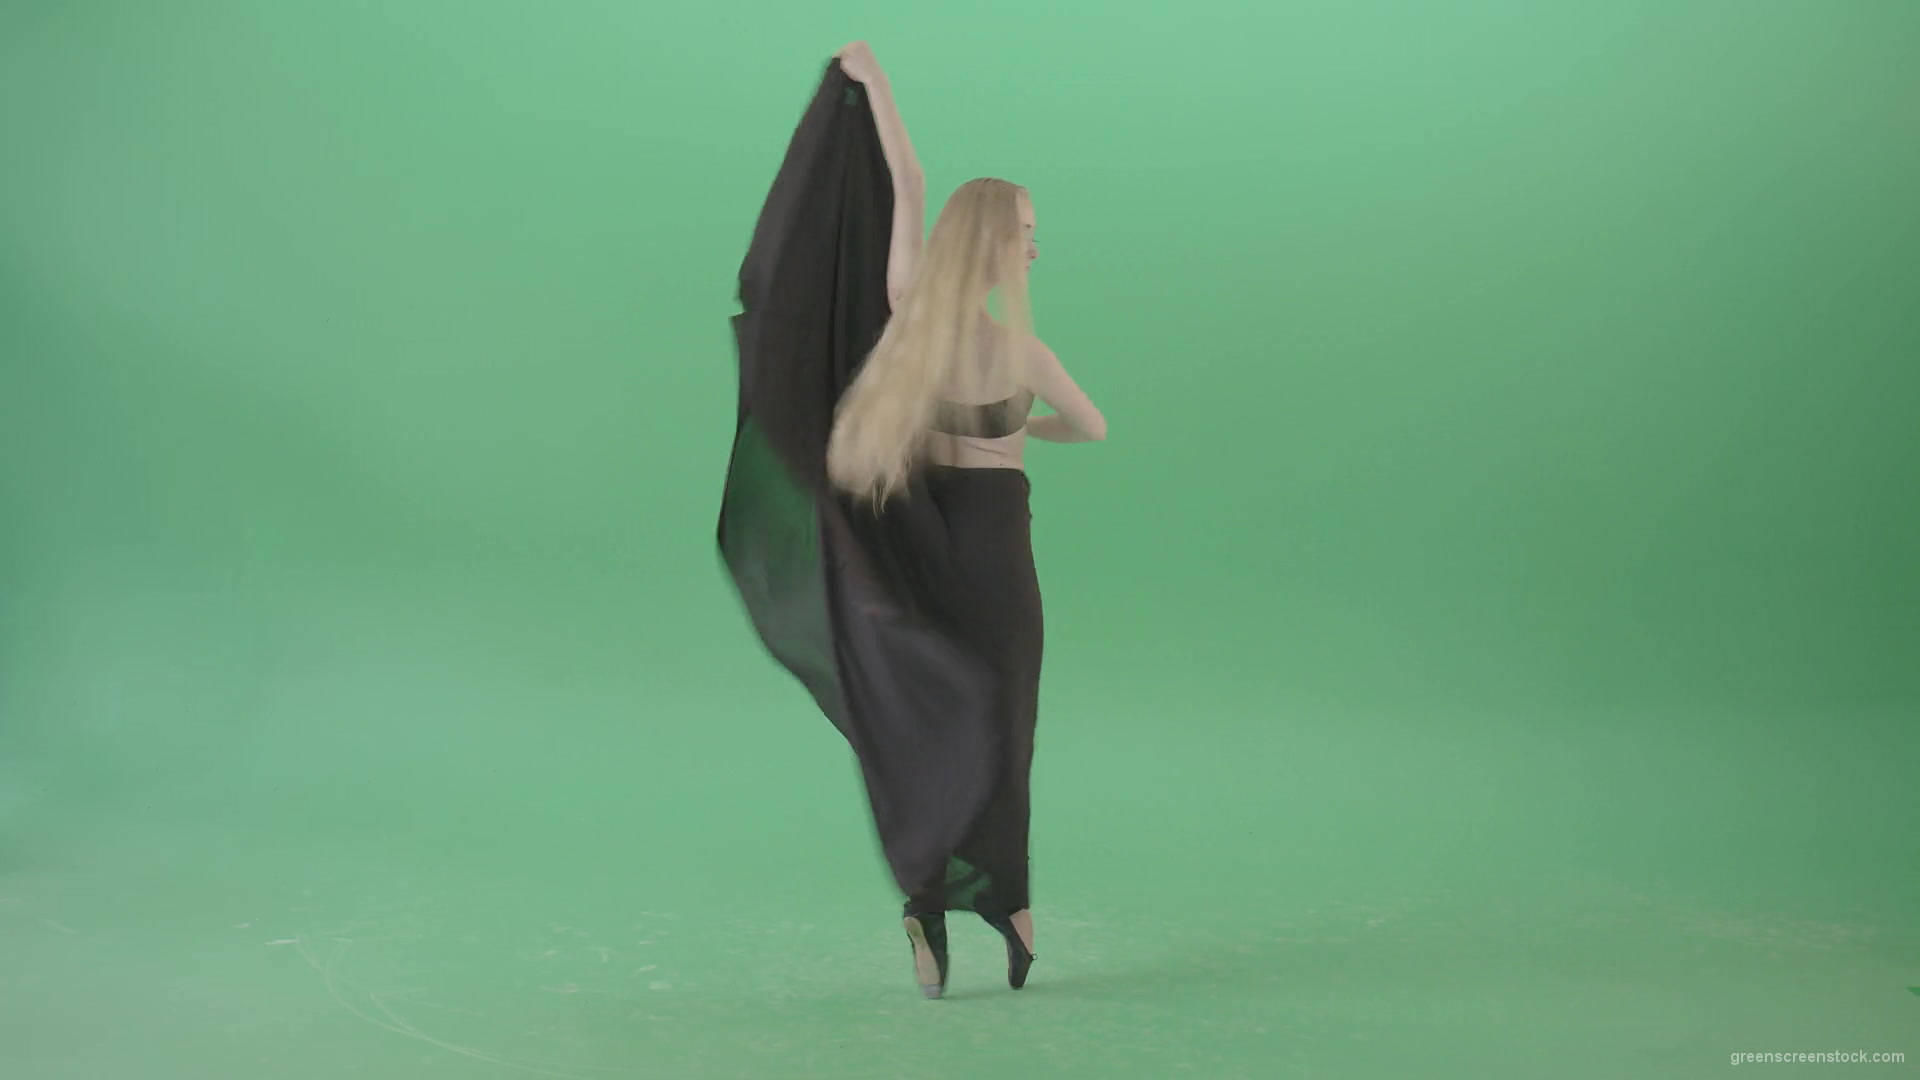 Spinning-isolated-on-green-screen-ballet-young-woman-ballerin-in-black-costume-4K-Video-Footage-1920_009 Green Screen Stock